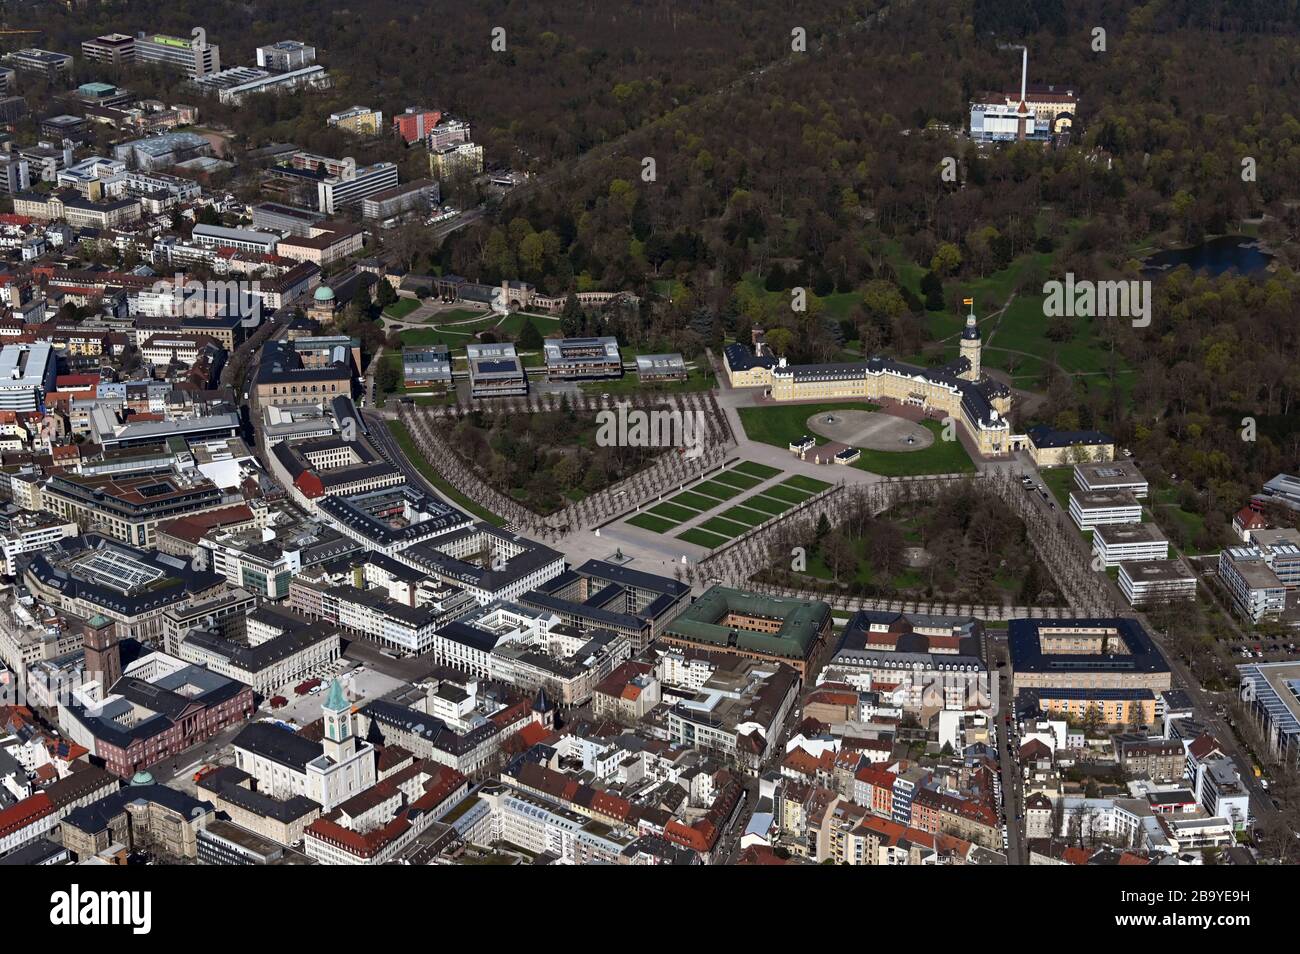 Karlsruhe, Germany. 24th Mar, 2020. Aerial view, taken from a plane, of the city center of Karlsruhe with the castle. Credit: Uli Deck/dpa/Alamy Live News Stock Photo